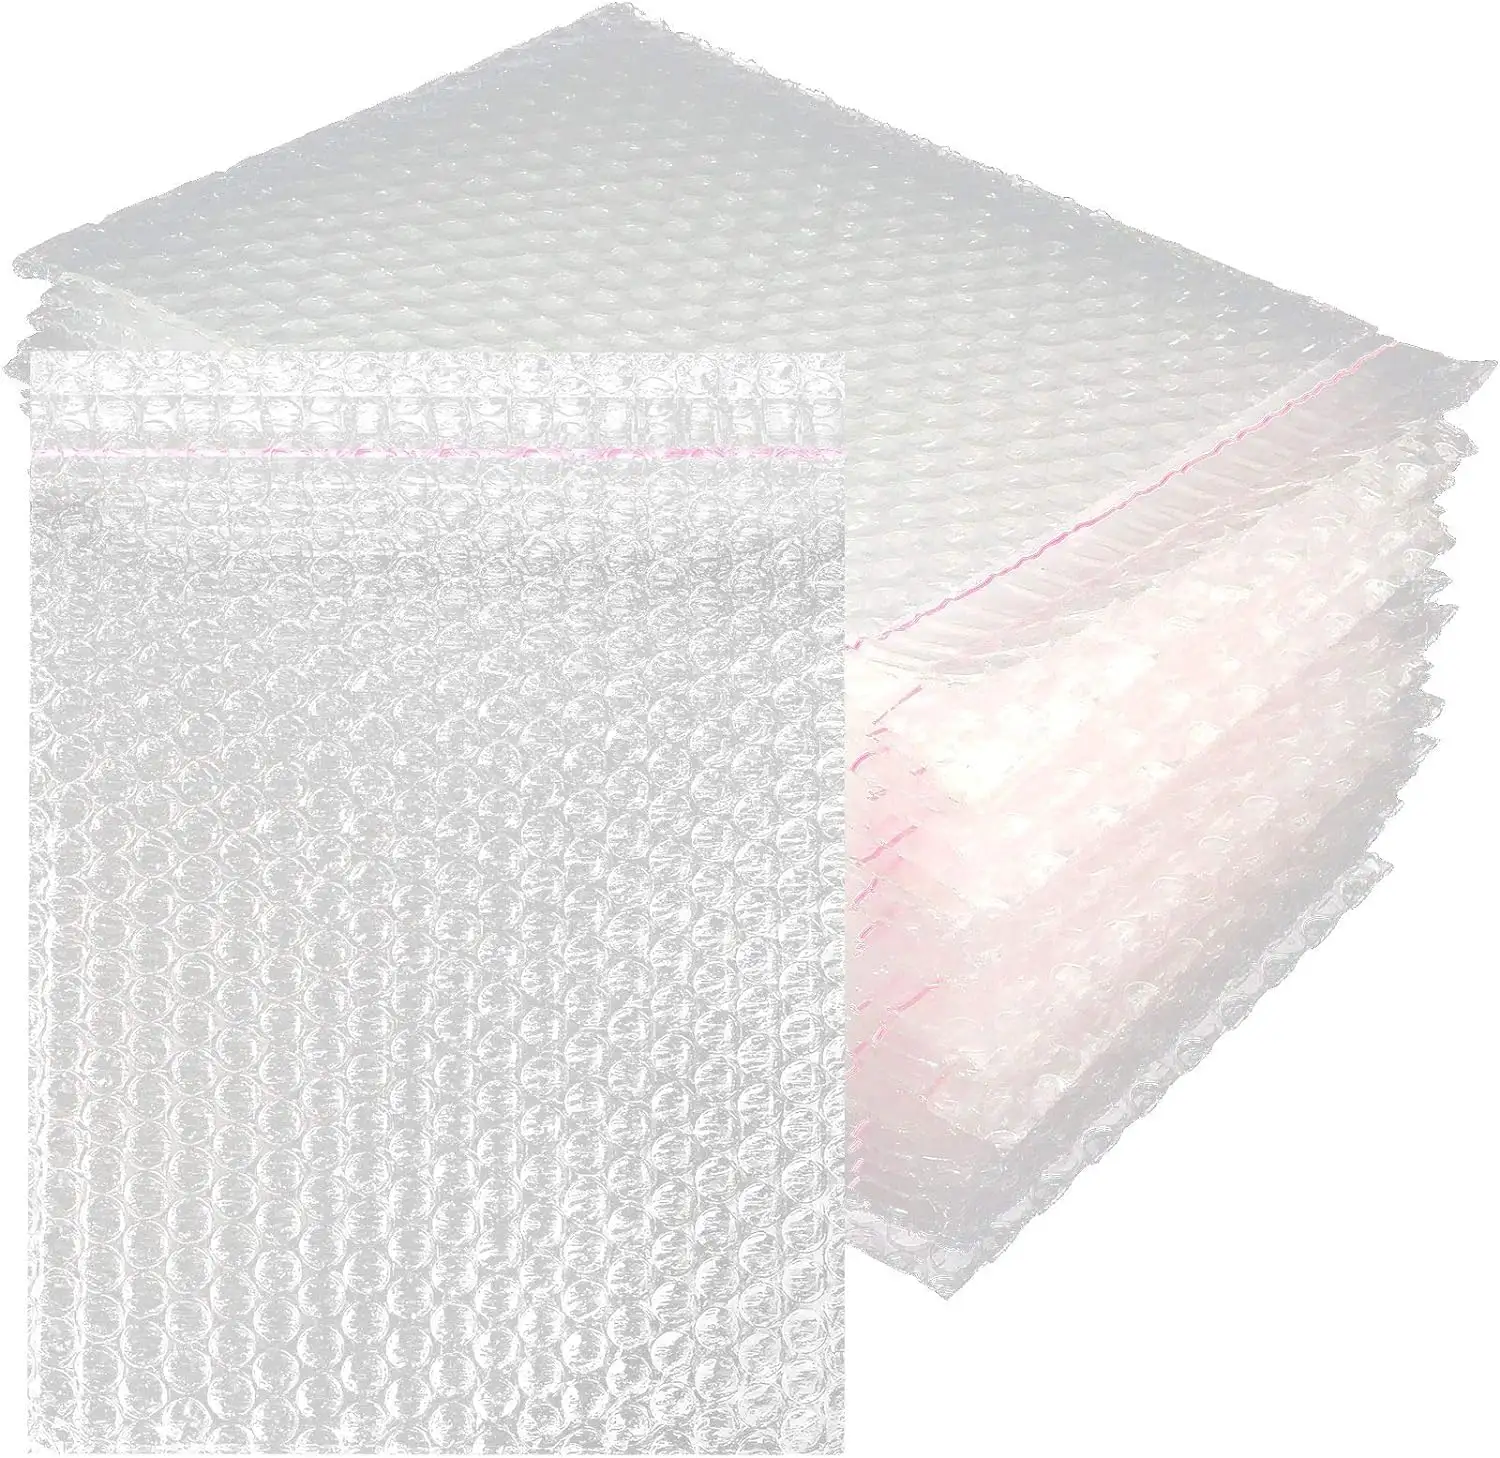 Free Sample High Quality wholesale Shockproof Transparent 100% New Raw Material Air Bubble Film Bag for Packaging